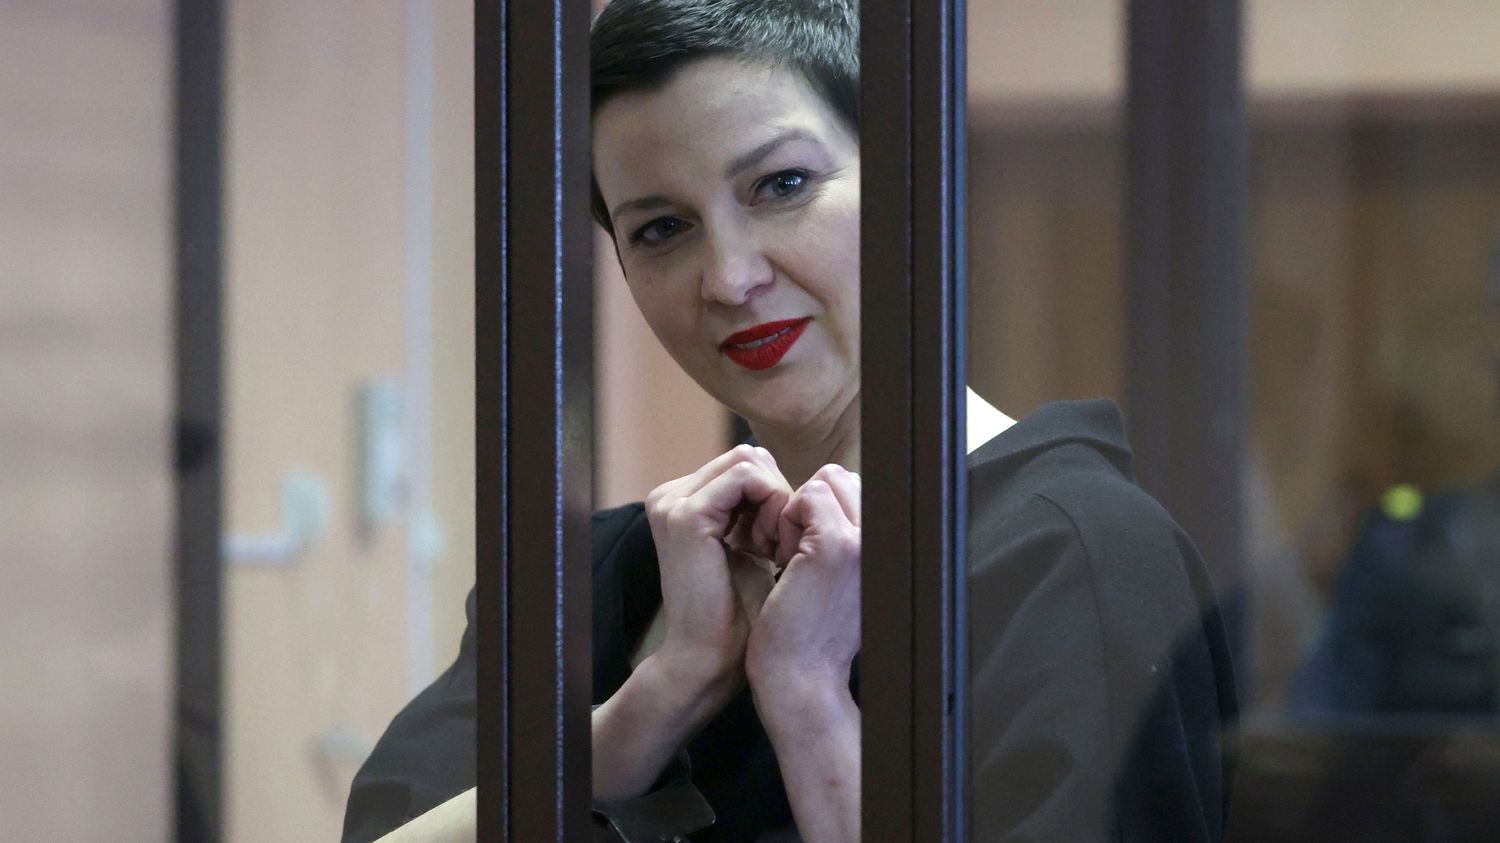 Belarus: concerns about the state of health of Maria Kolesnikova, opponent of the Lukashenko regime imprisoned for 1,000 days
